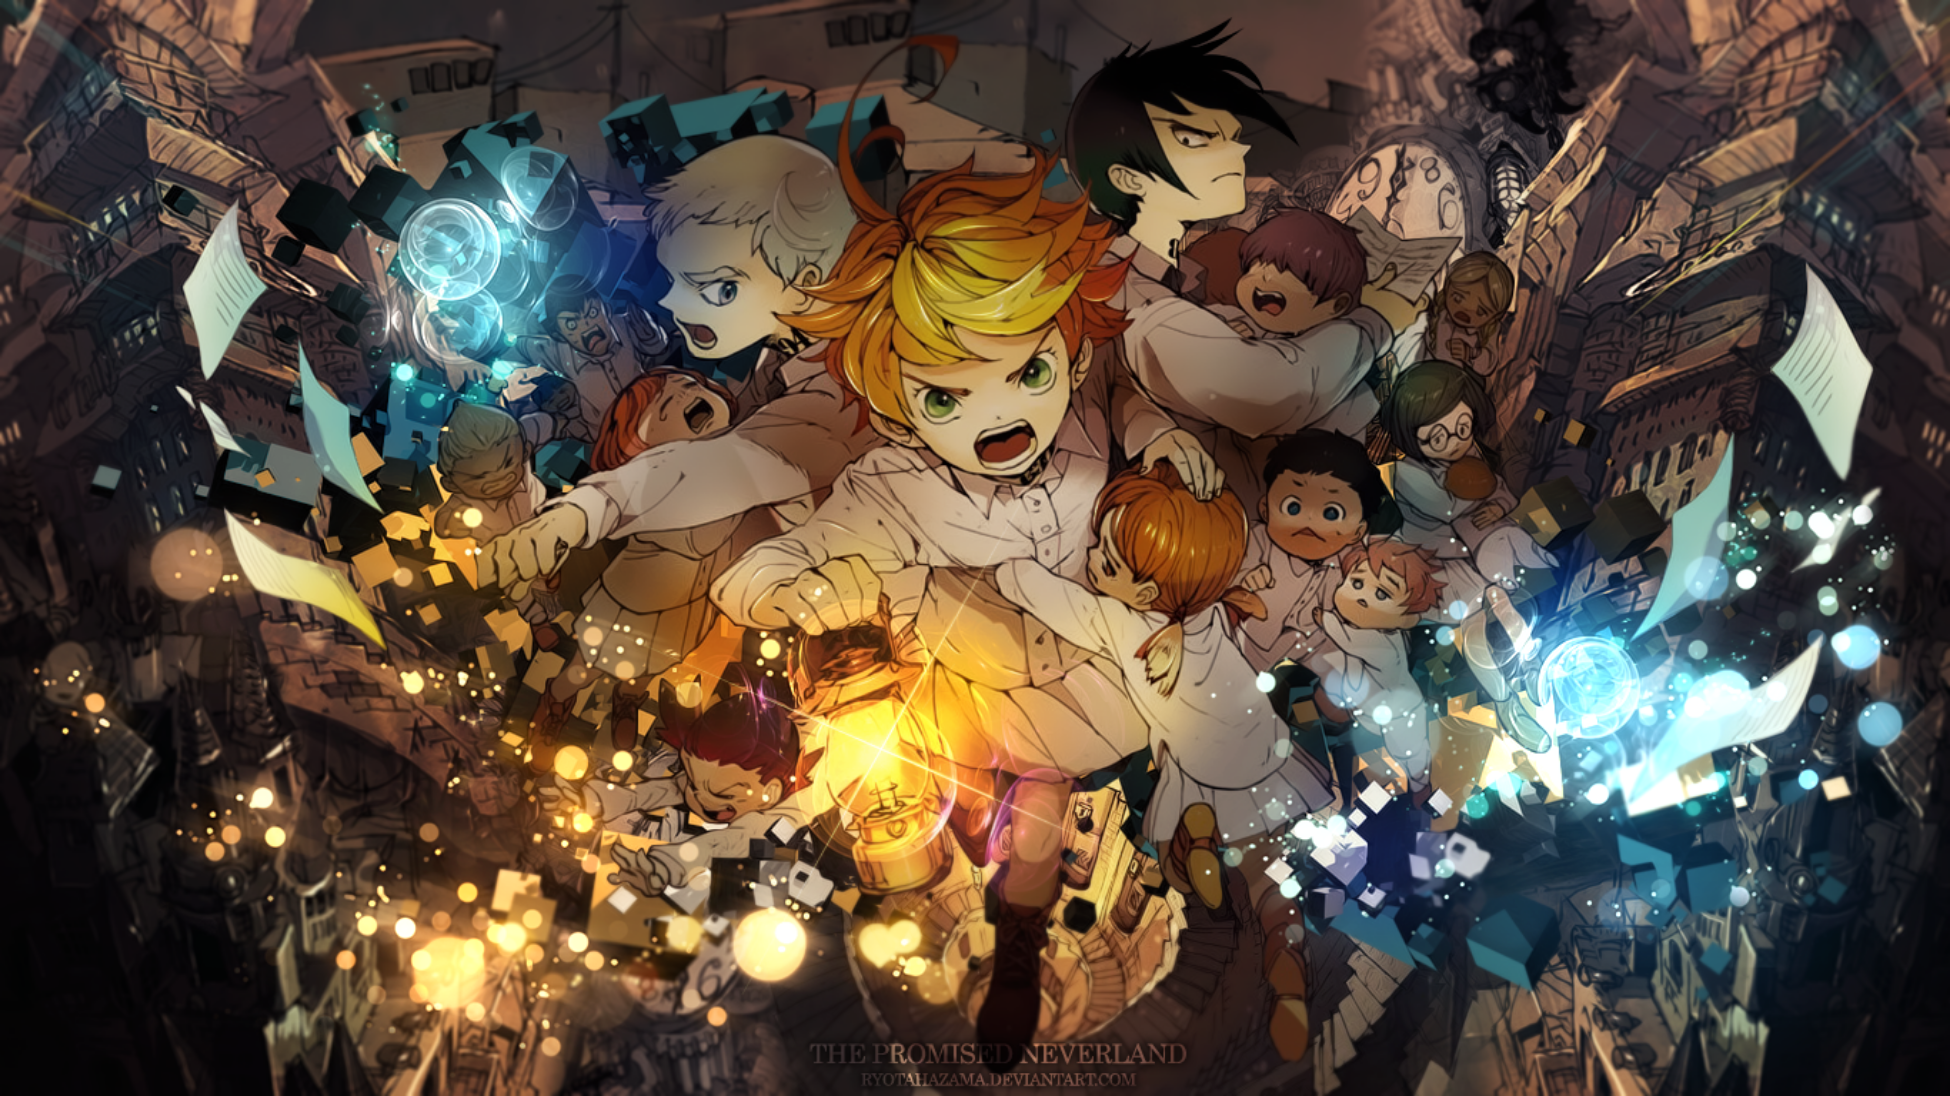 Anna The Promised Neverland Don The Promised Neverland Emma The Promised Neverland Eugene The Promis 1950x1096